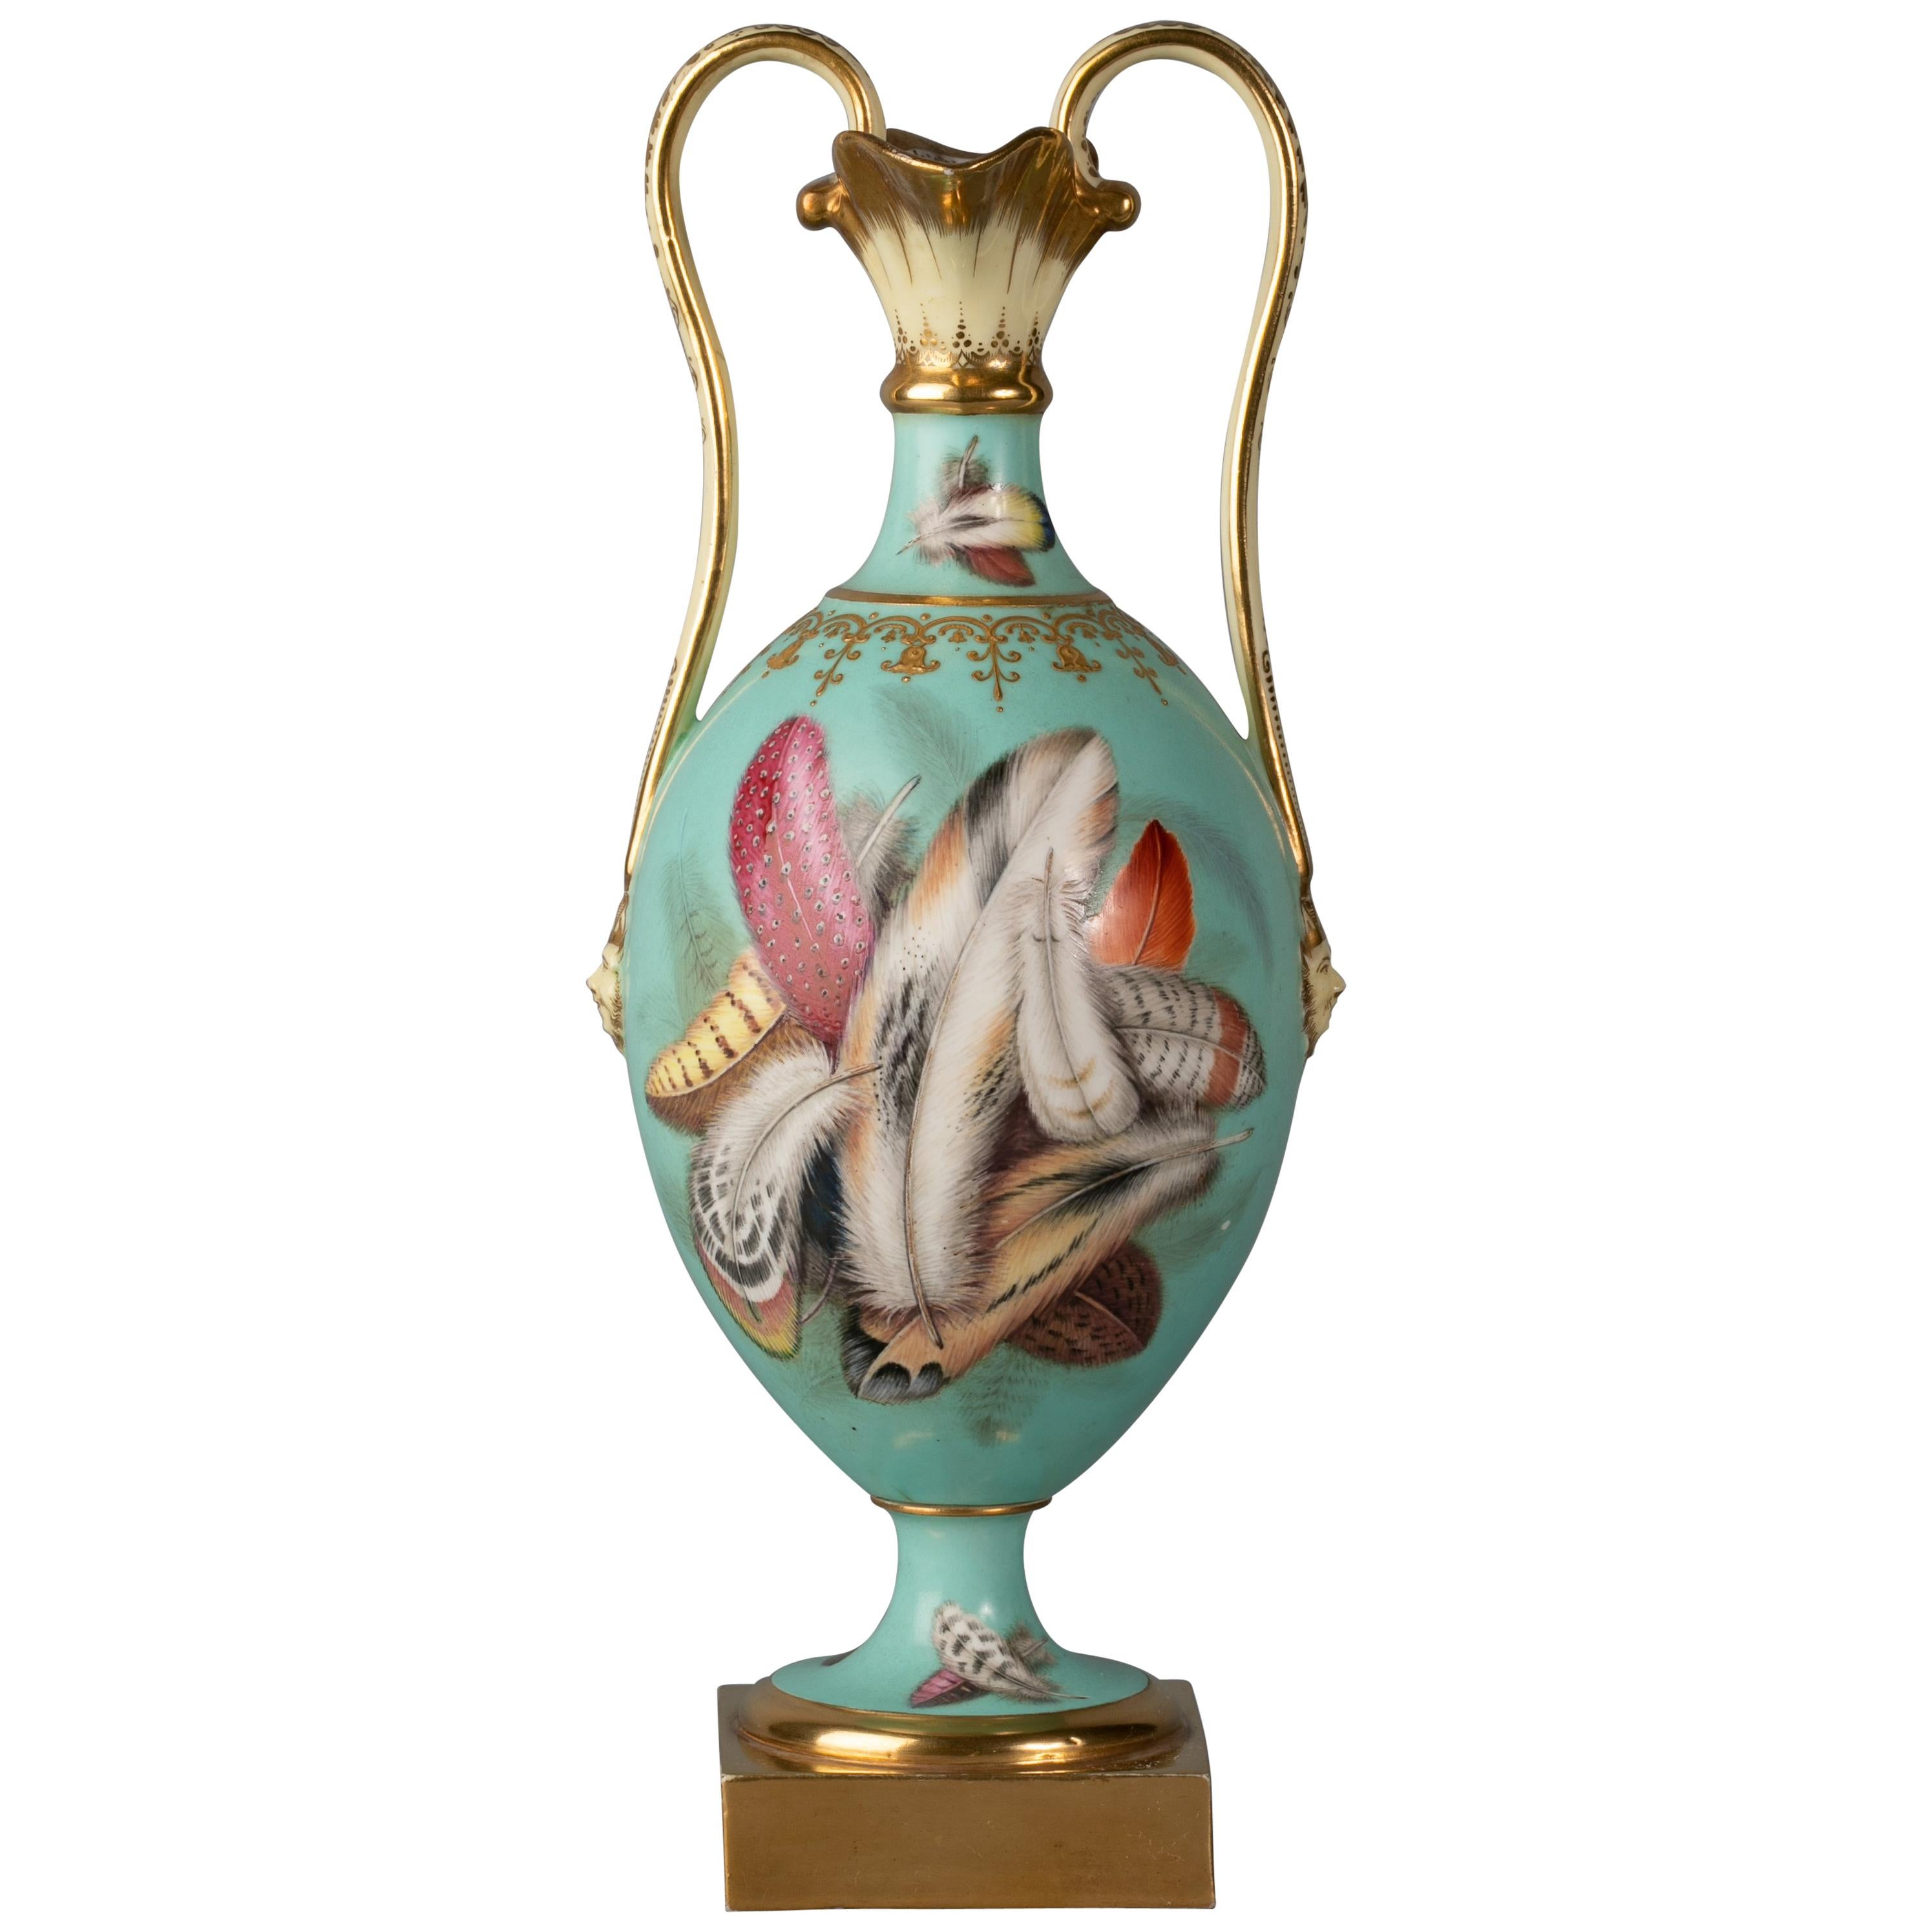 English Porcelain Two-Handled Vase with Feathers, Minton, circa 1840